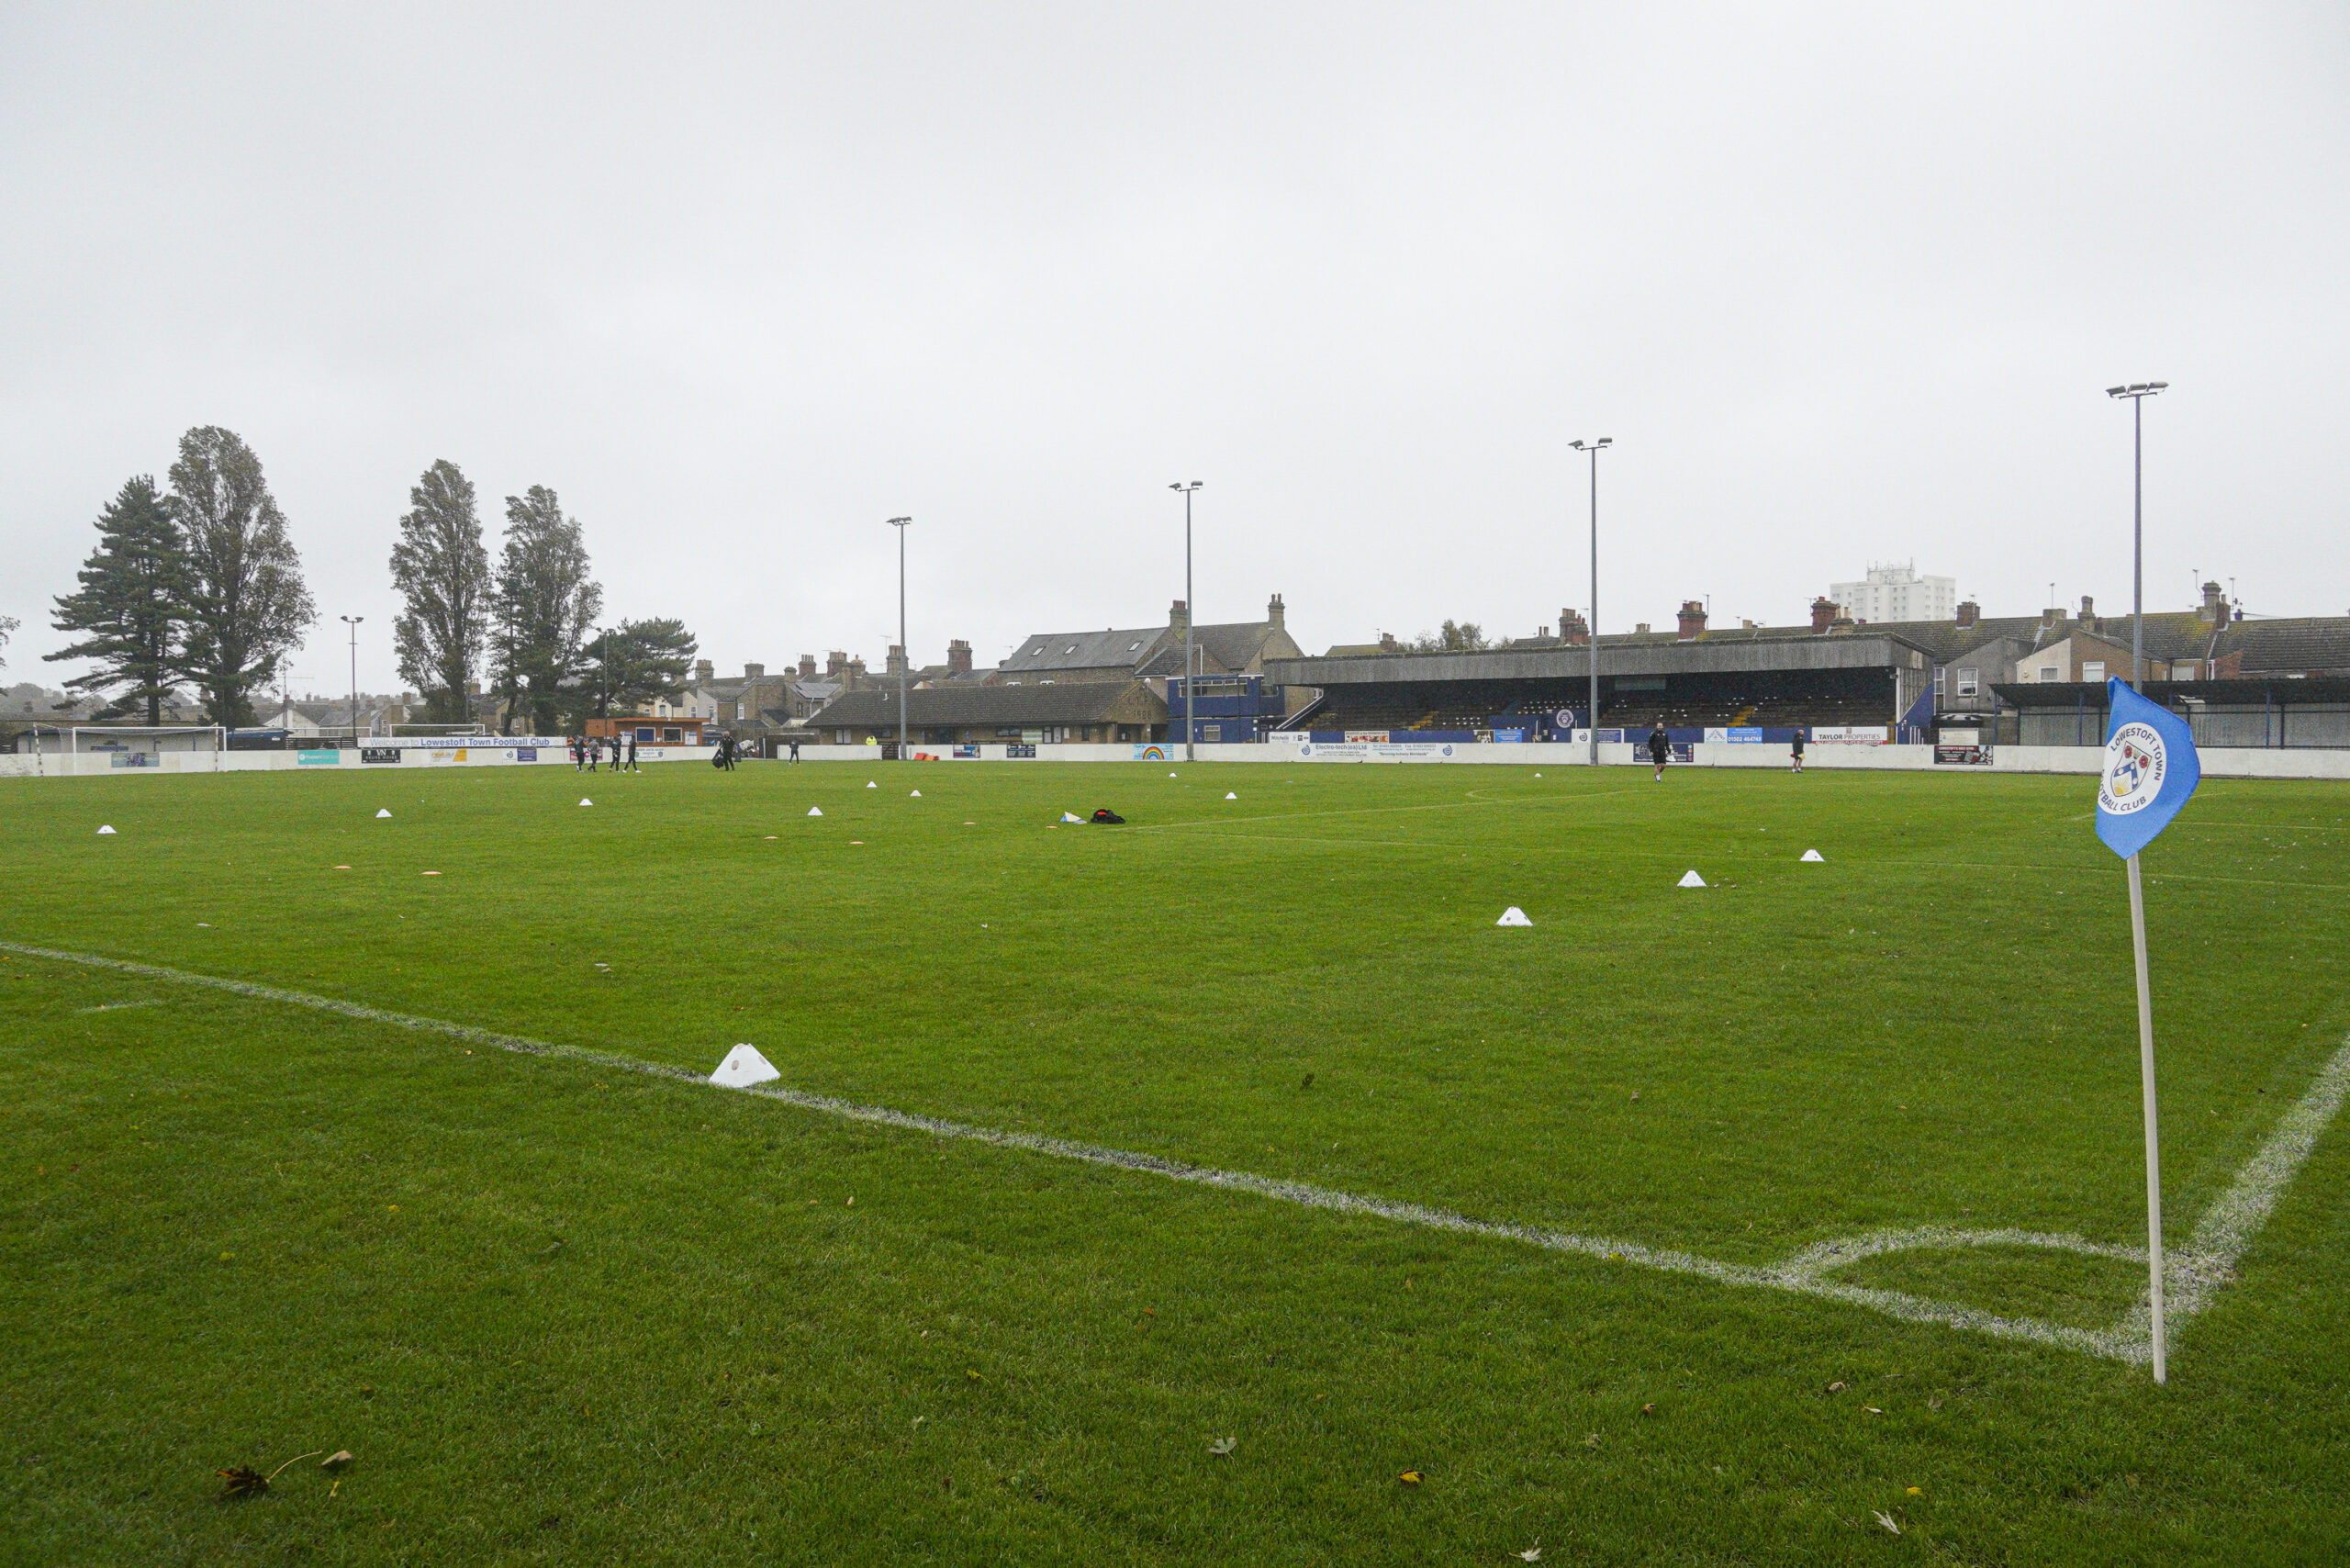 An empty football pitch with stands in the back ground. There are tall trees to the left of the pitch and white cones laid out as if in readiness for a training session. In the foreground is a white corner post with a light blue flag